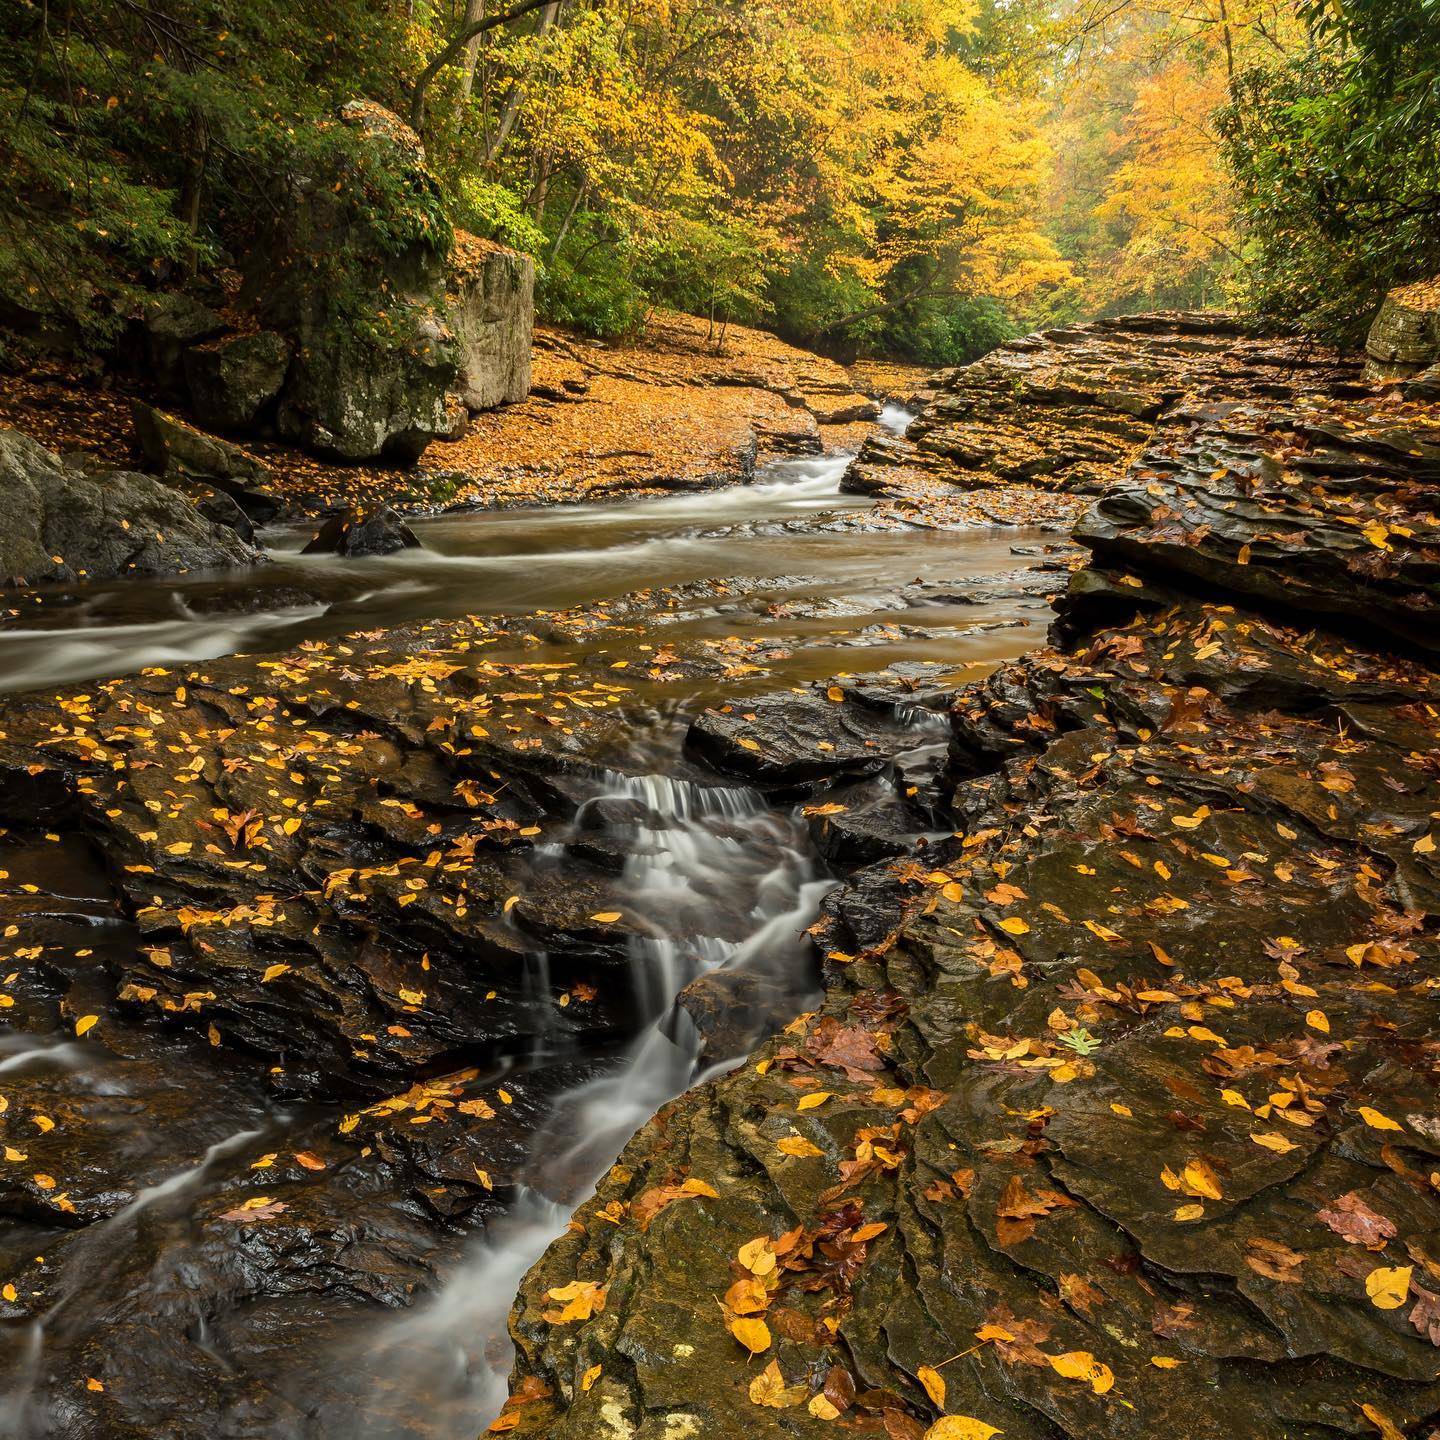 Meadow Run in Ohiopyle State Park